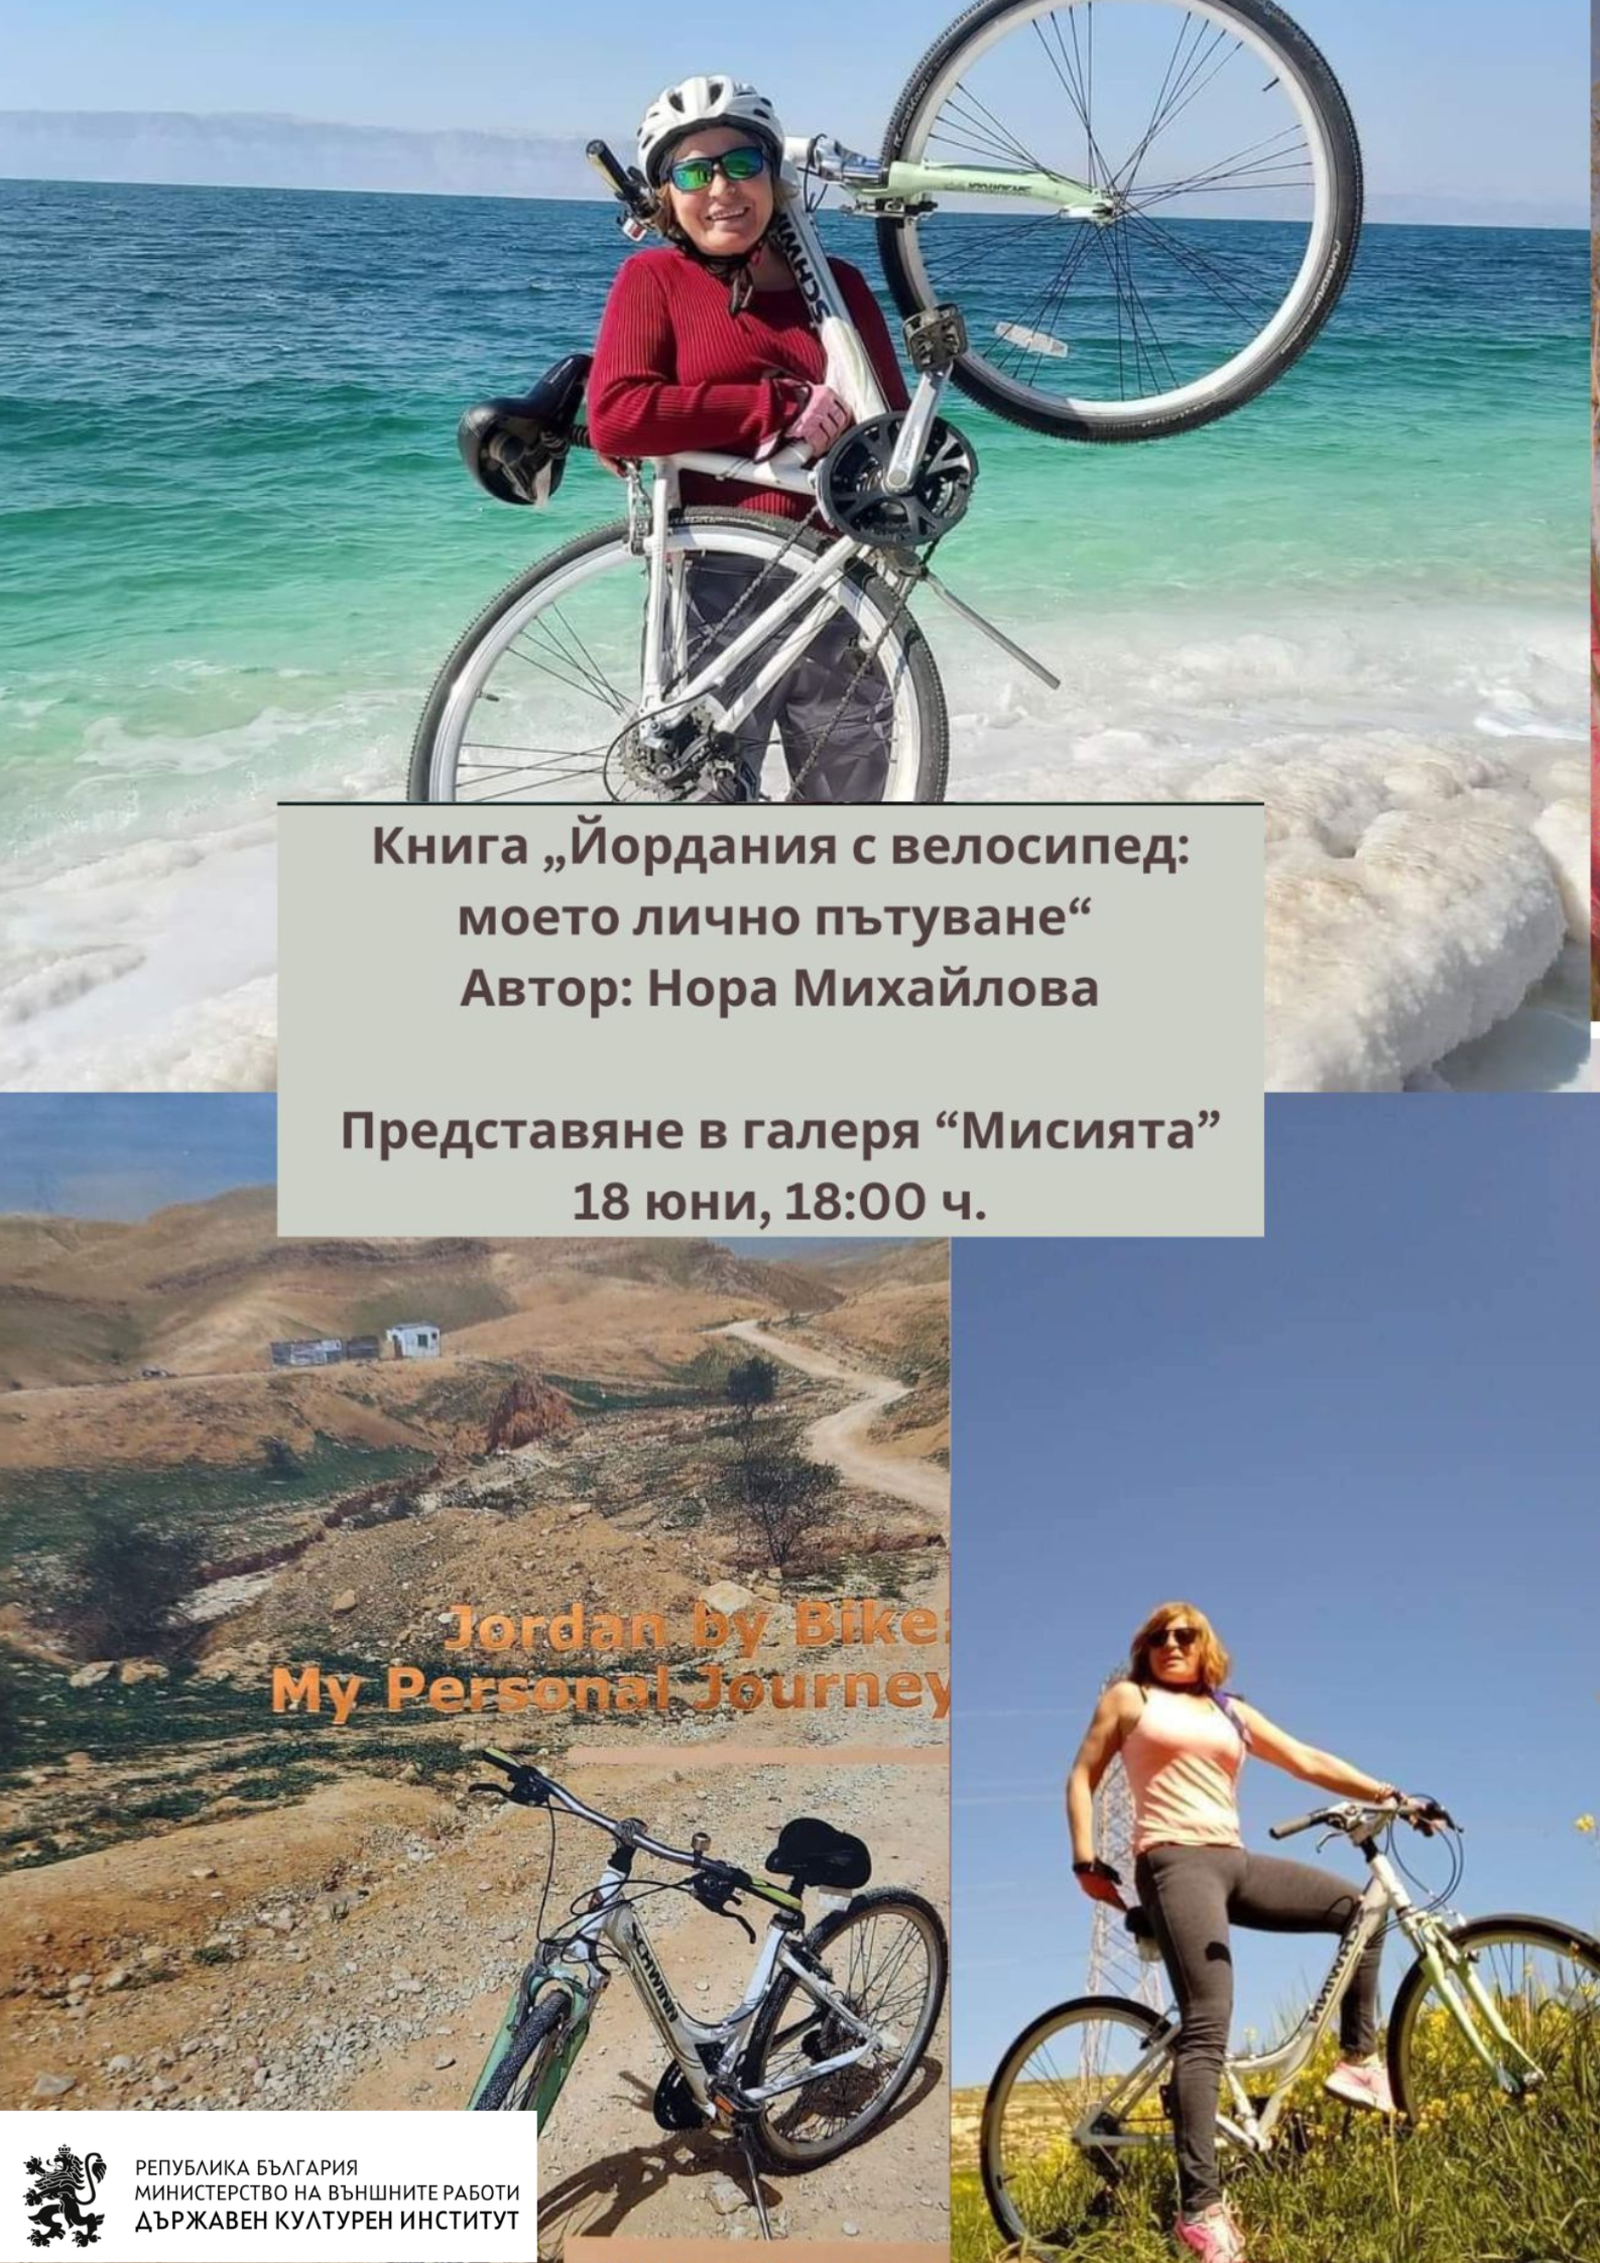 Book of Travelogues and Photo Reports "Jordan by bicycle: My personal journey" by Nora Mihailova